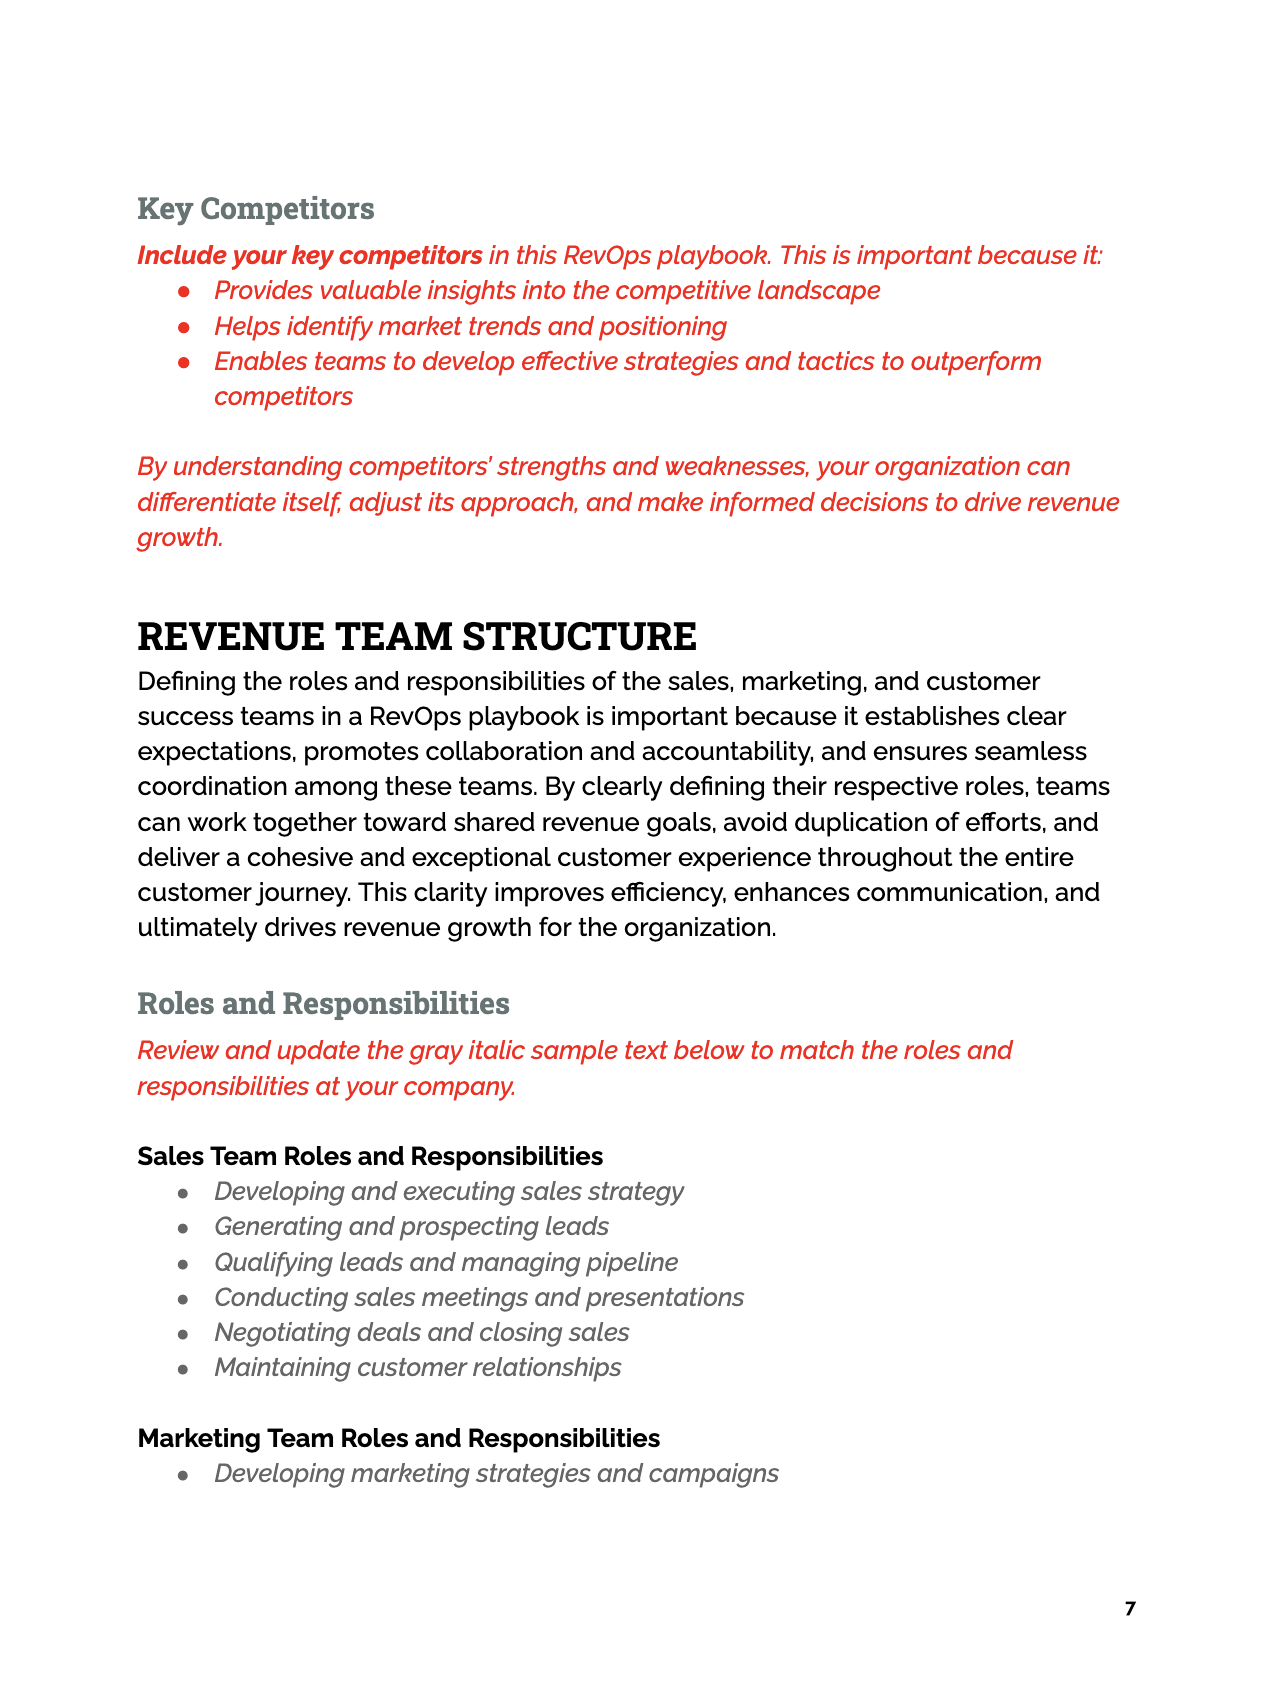 RevOps Playbook Template - team structure page